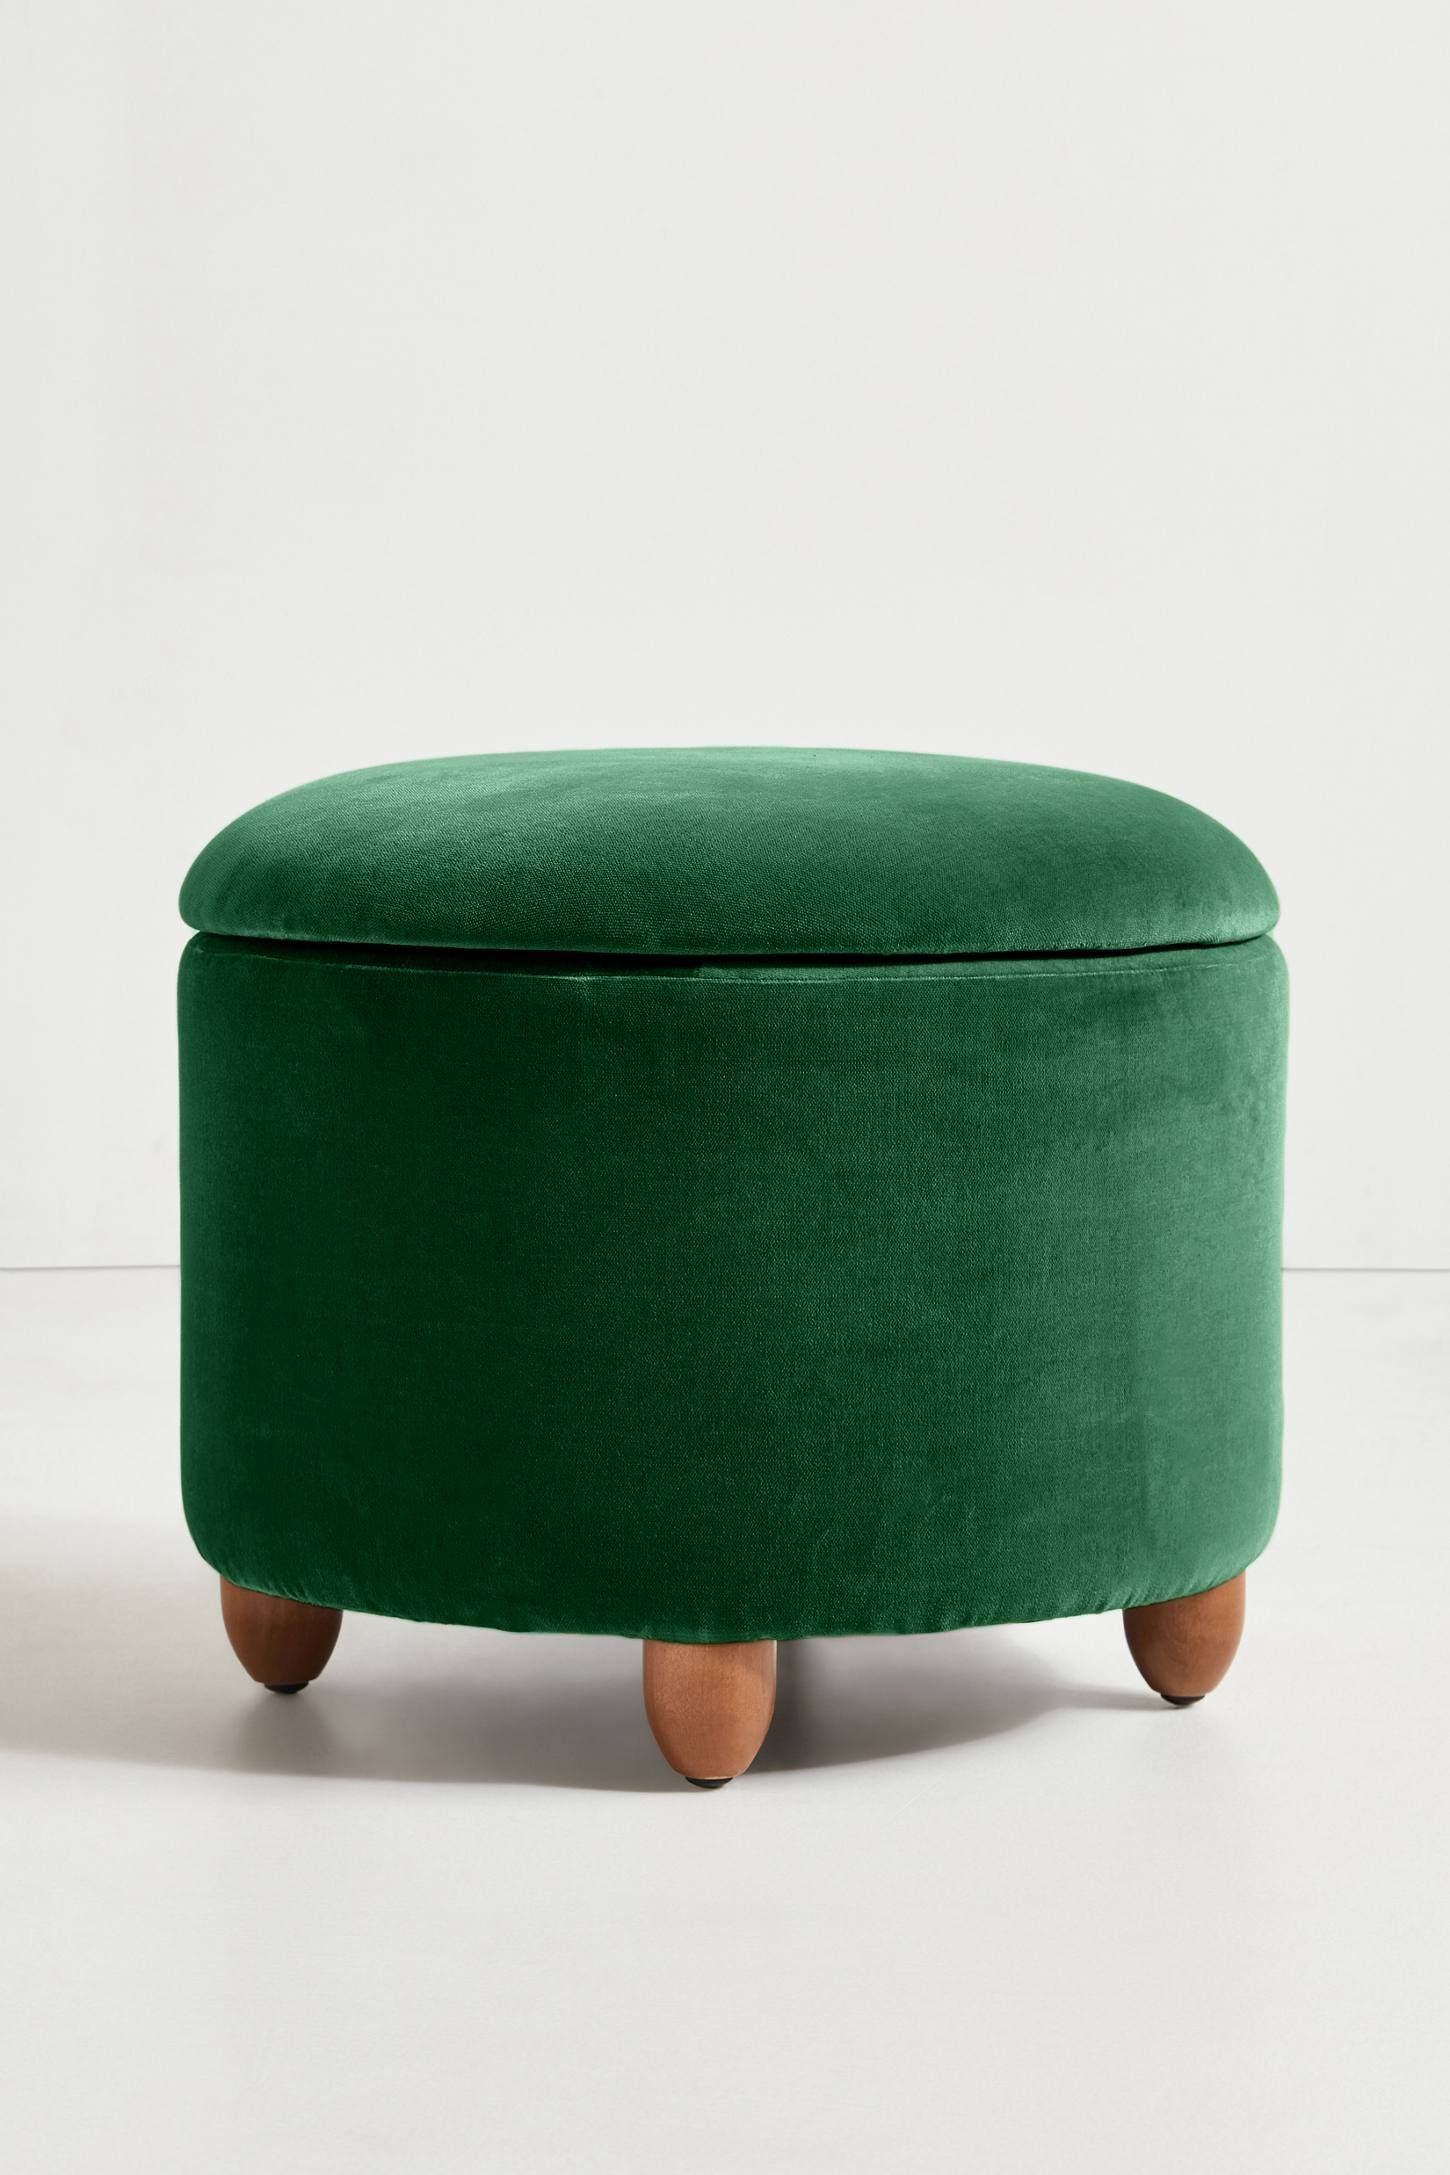 Buy Dawson Storage Ottoman Color Celery Green Diy Storage Ottoman Round In Natural Beige And White Cylinder Pouf Ottomans (View 14 of 20)